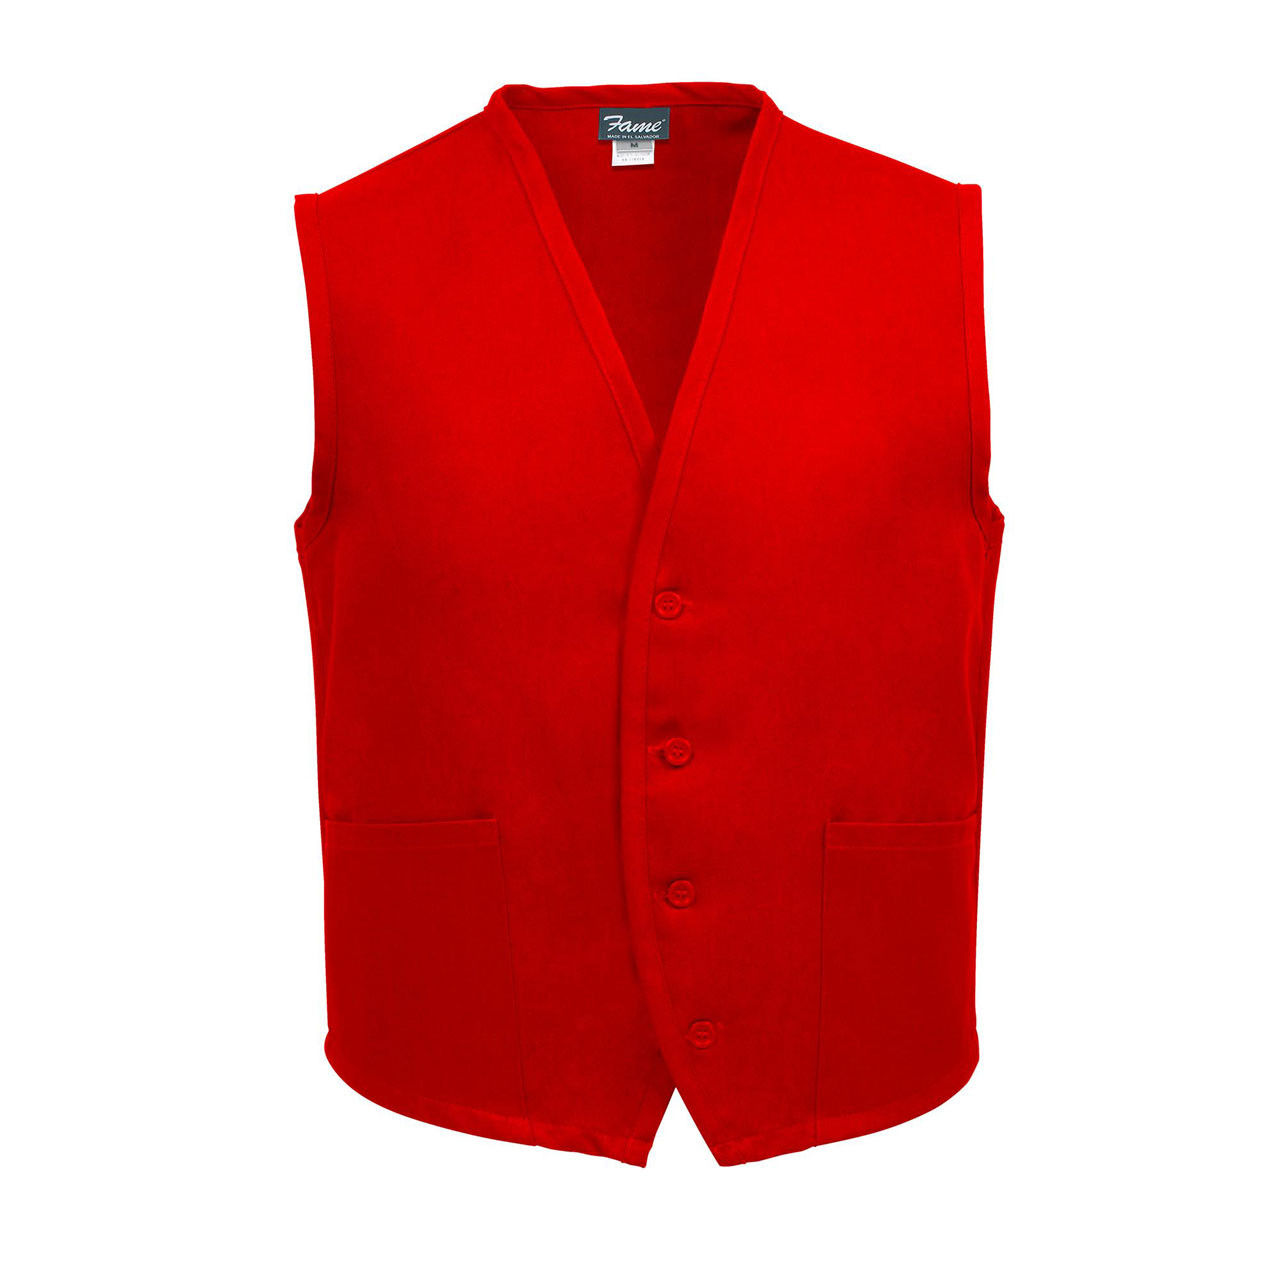 What style and functionality does the red vest offer?